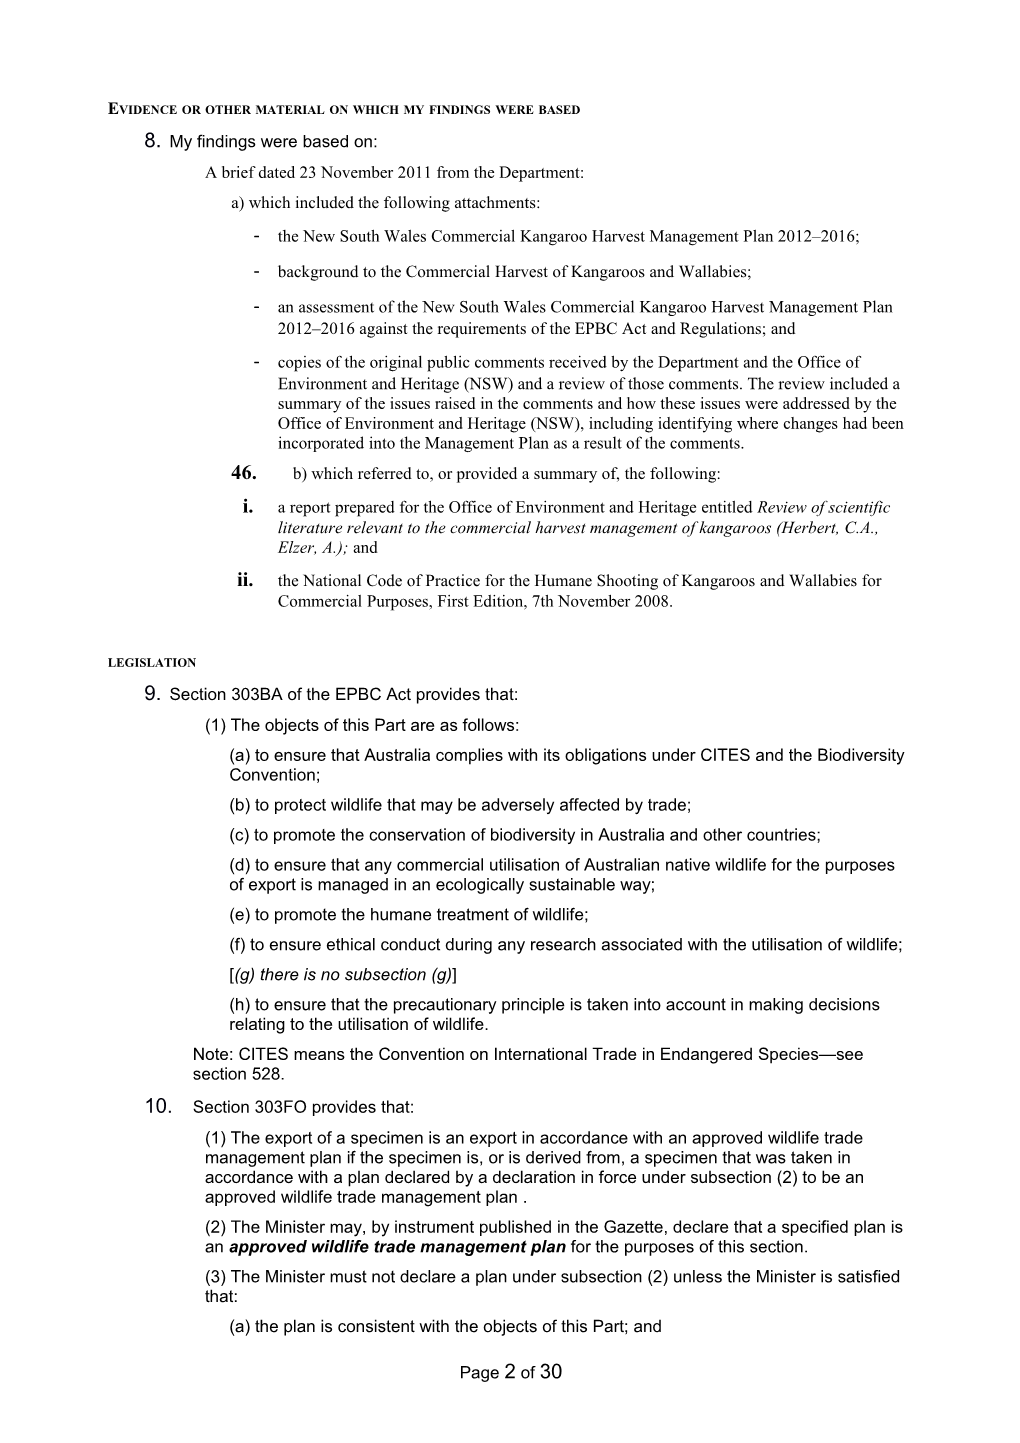 Minister S Statement of Reasons for Approving the NSW Kangaroo Management Plan